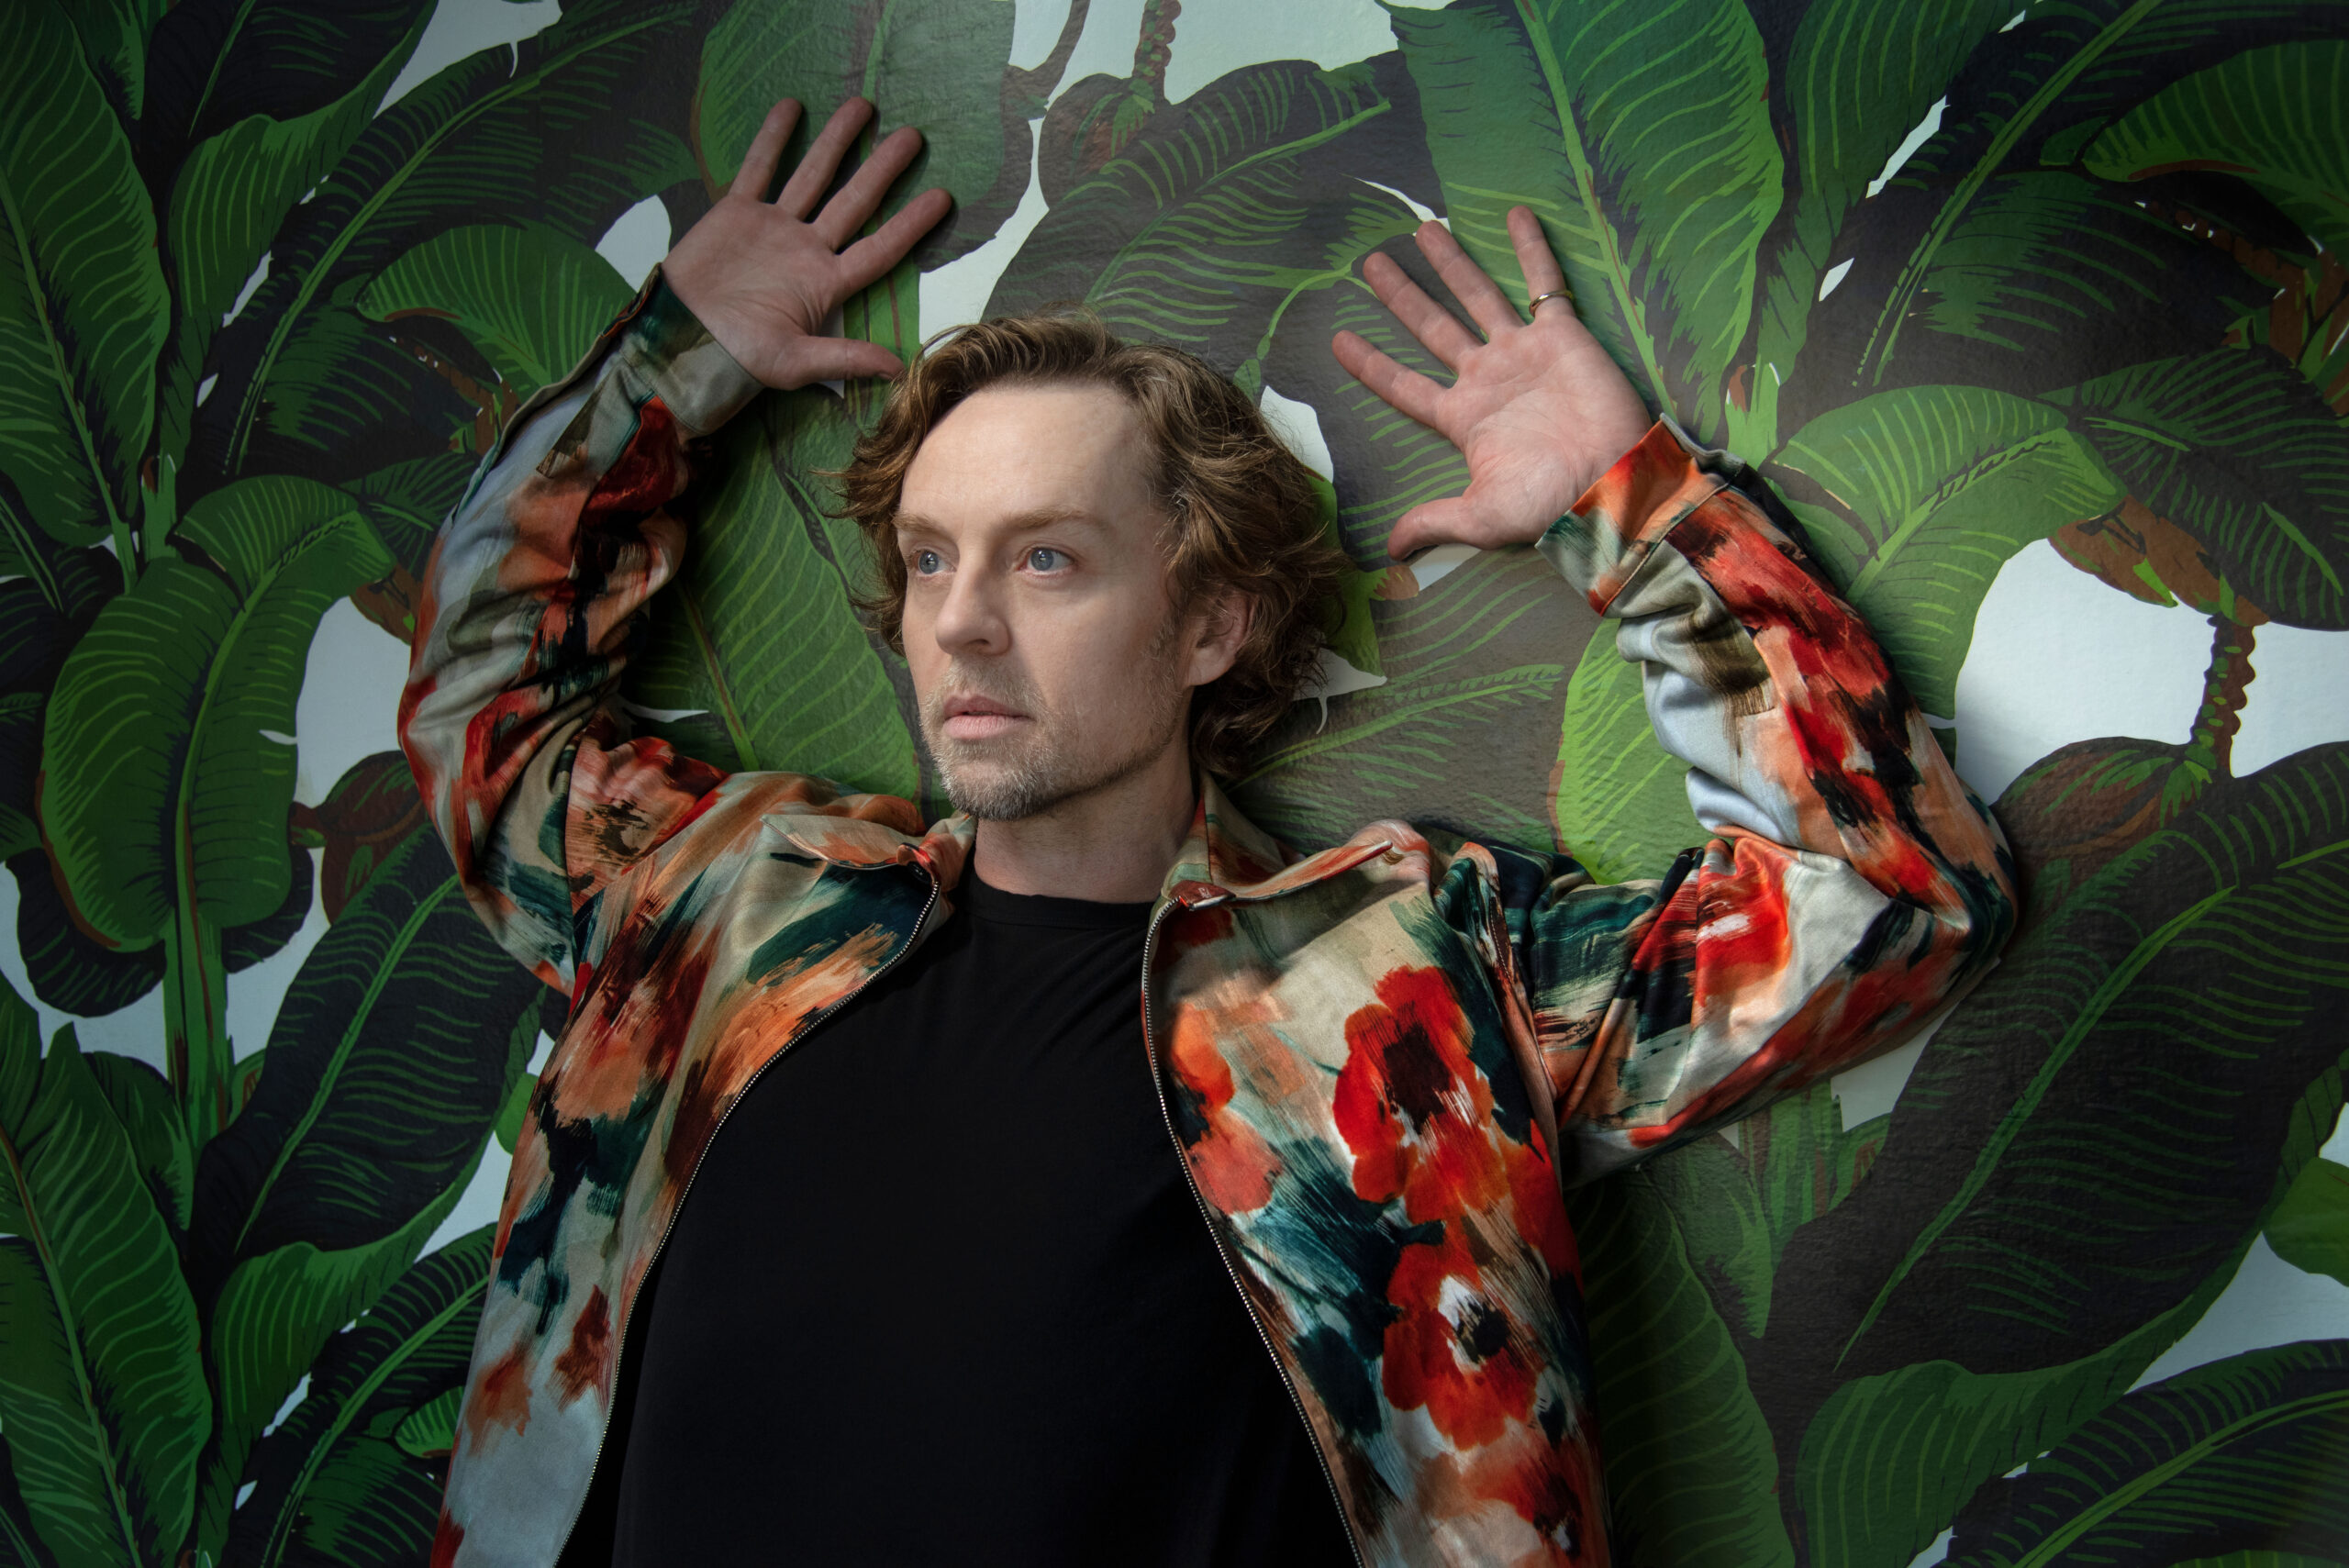 Darren Hayes returns with new music after 10 years, headline performer at 2022 Mardi Gras Parade